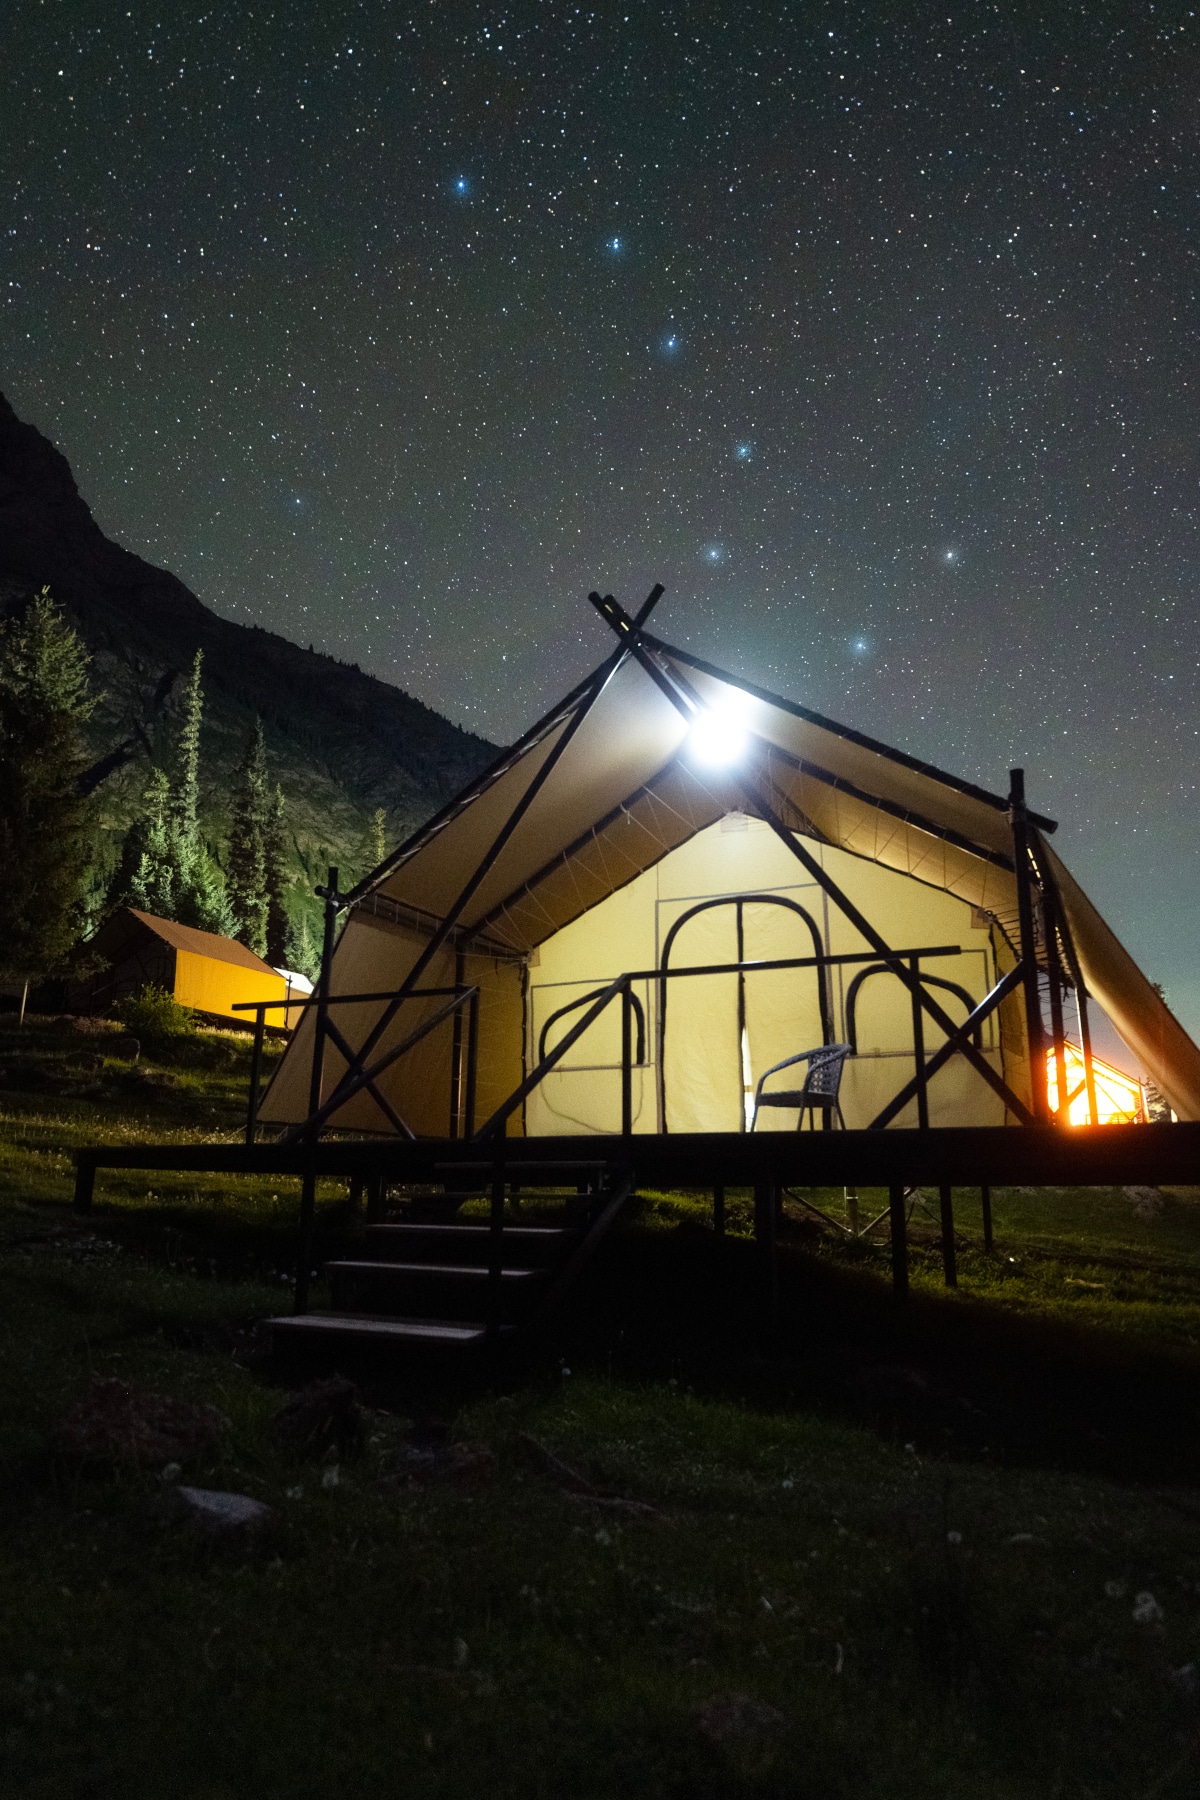 Big Dipper above Tents at Barskoon Valley